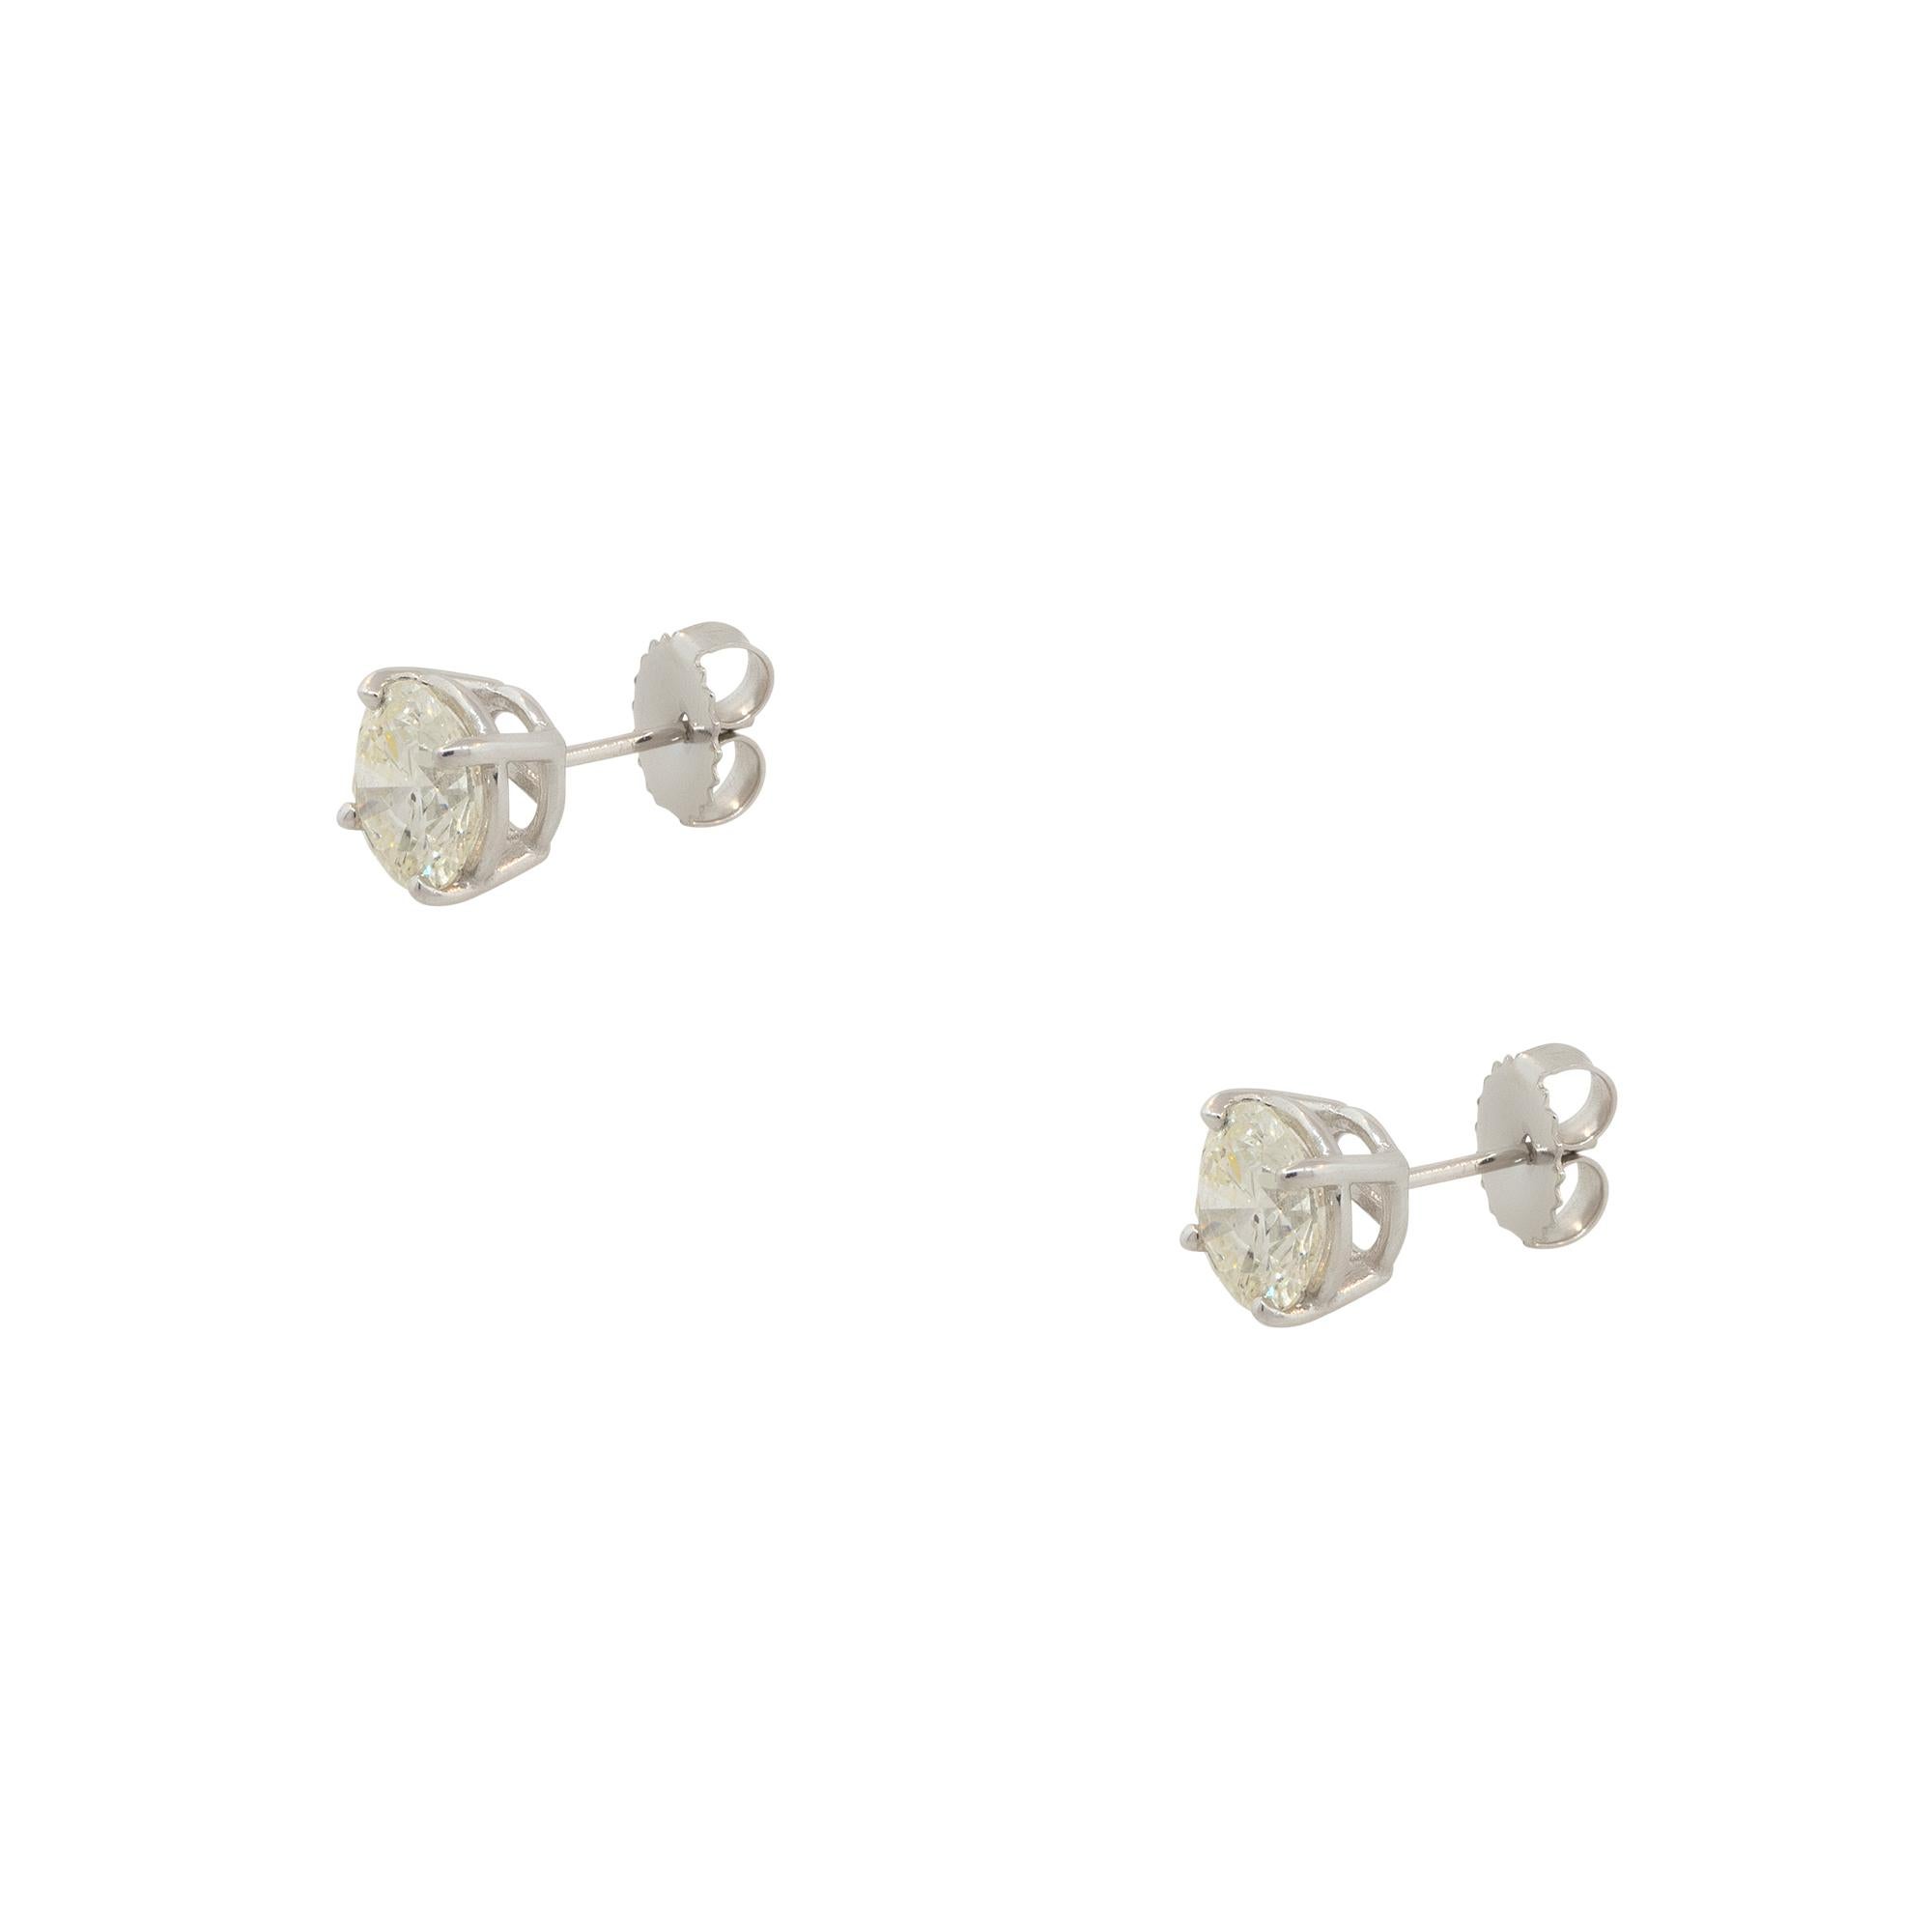 Material: 14k White Gold
Diamond Details: Approx. 3.03ctw. of Diamonds. Diamonds are I in color and SI3 in clarity
Earring Backs: Friction Backs
Additional Details: This item comes with a presentation box!
SKU: G10463